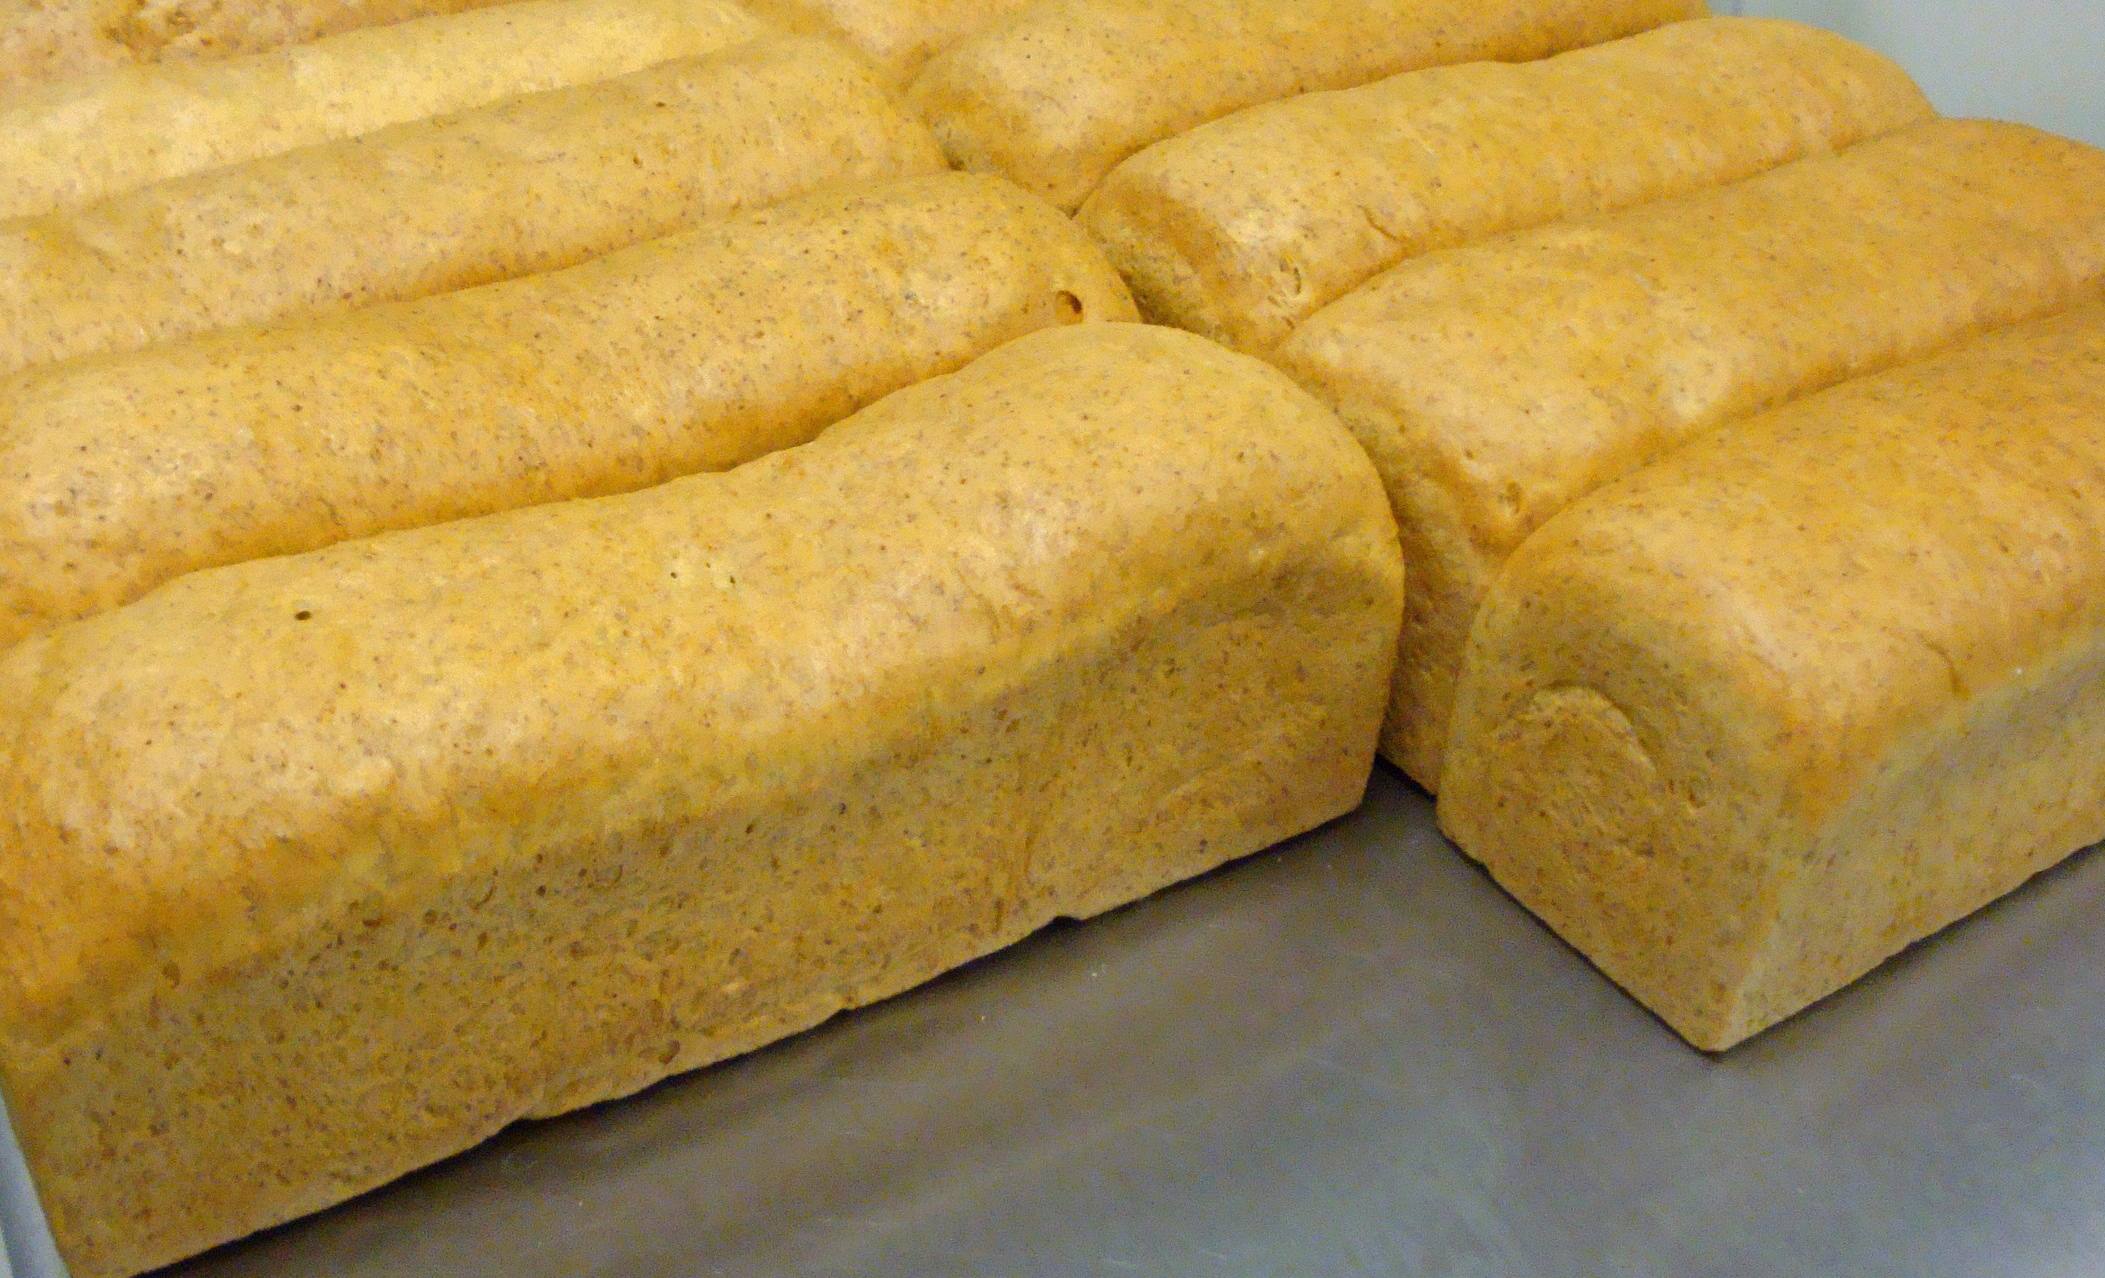 Thumbnail for Fresh Baked, Low Carb White & Multigrain Bread-Available Now!